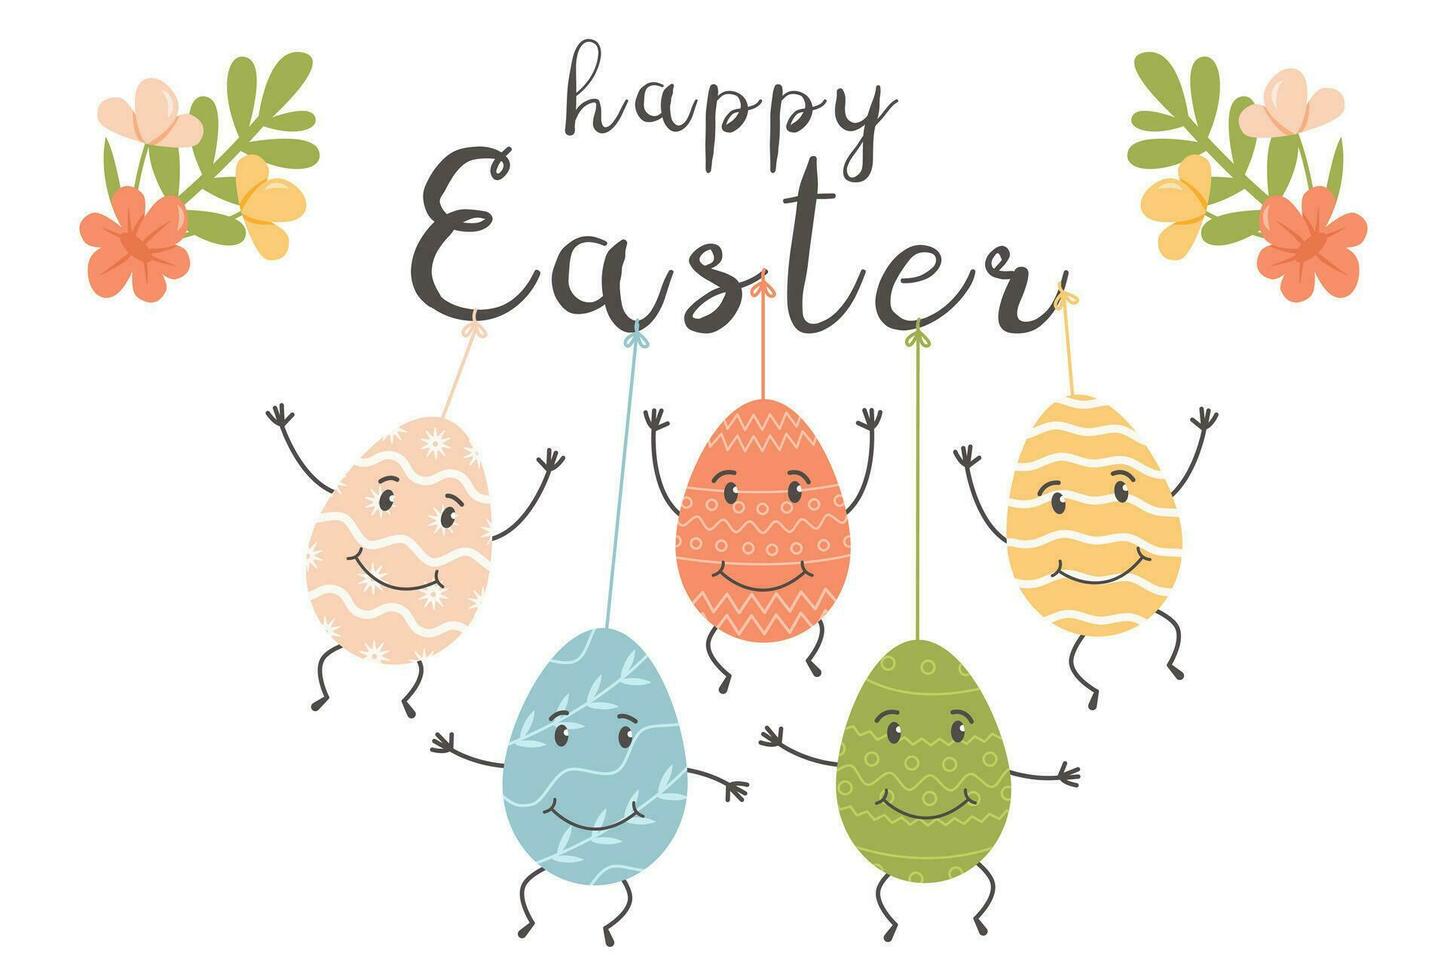 Happy Easter greeting card or cover with decorated colored eggs characters with cute faces. Different ornaments on eggs for Paschal. Flat vector illustration for spring religious holiday.